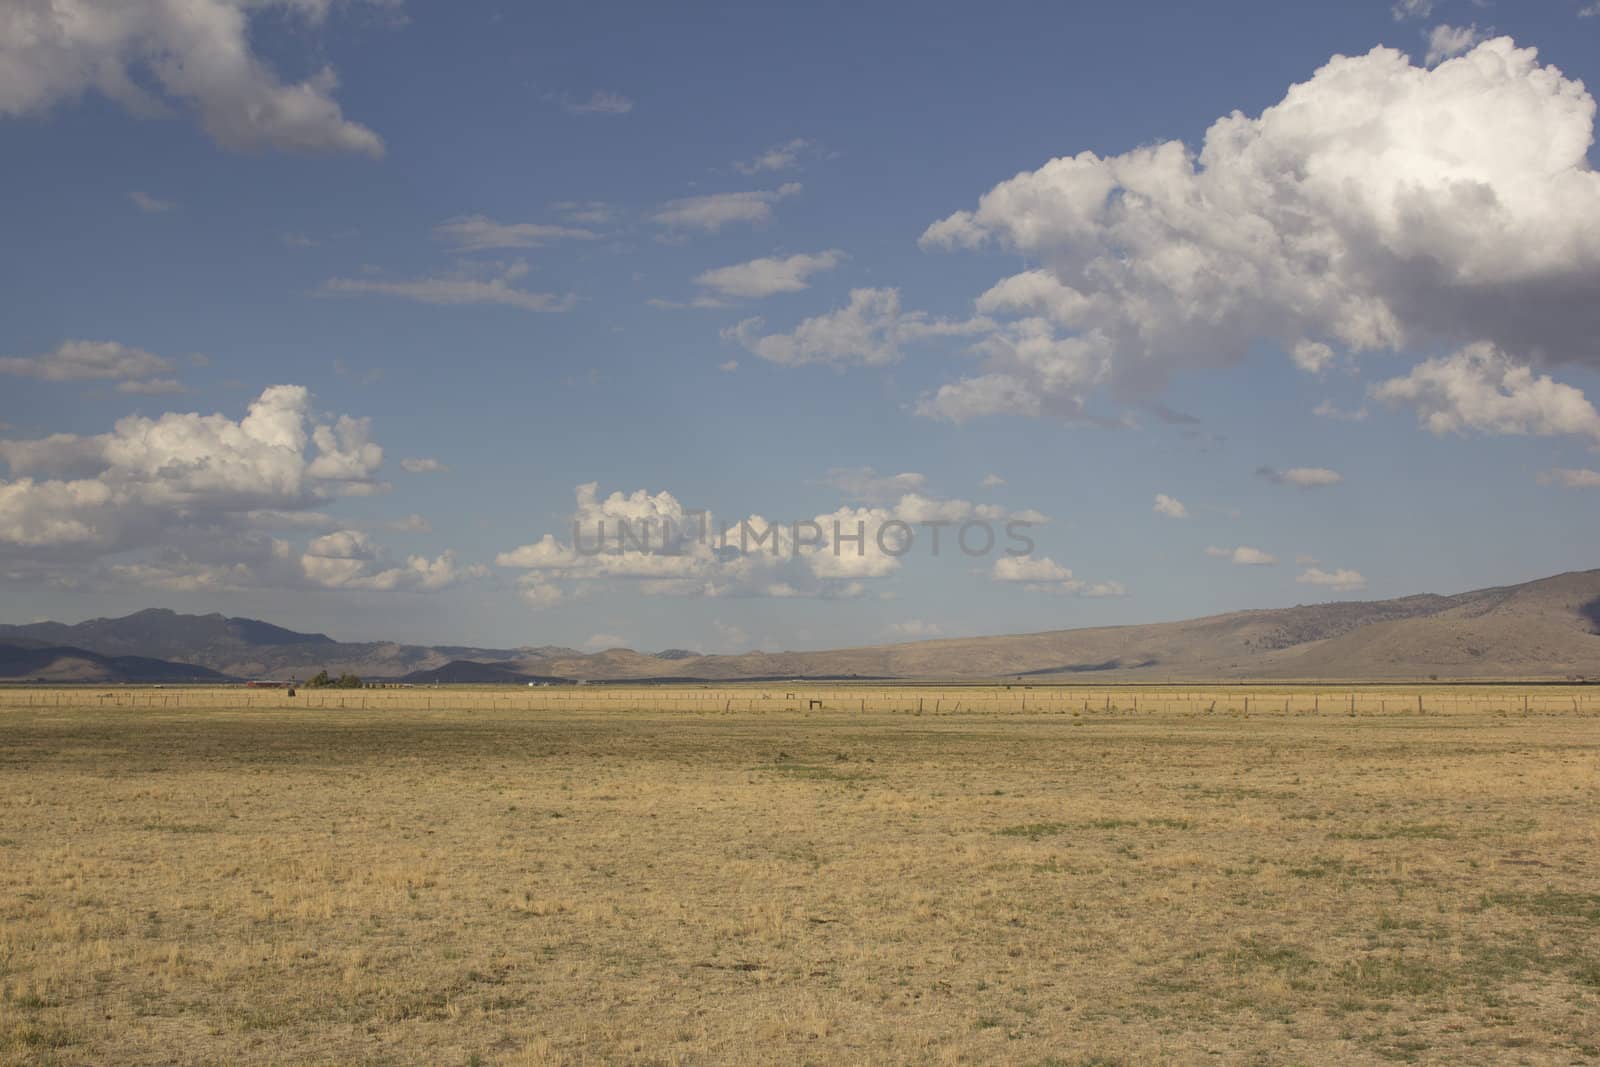 Large open field with clouds in the sky